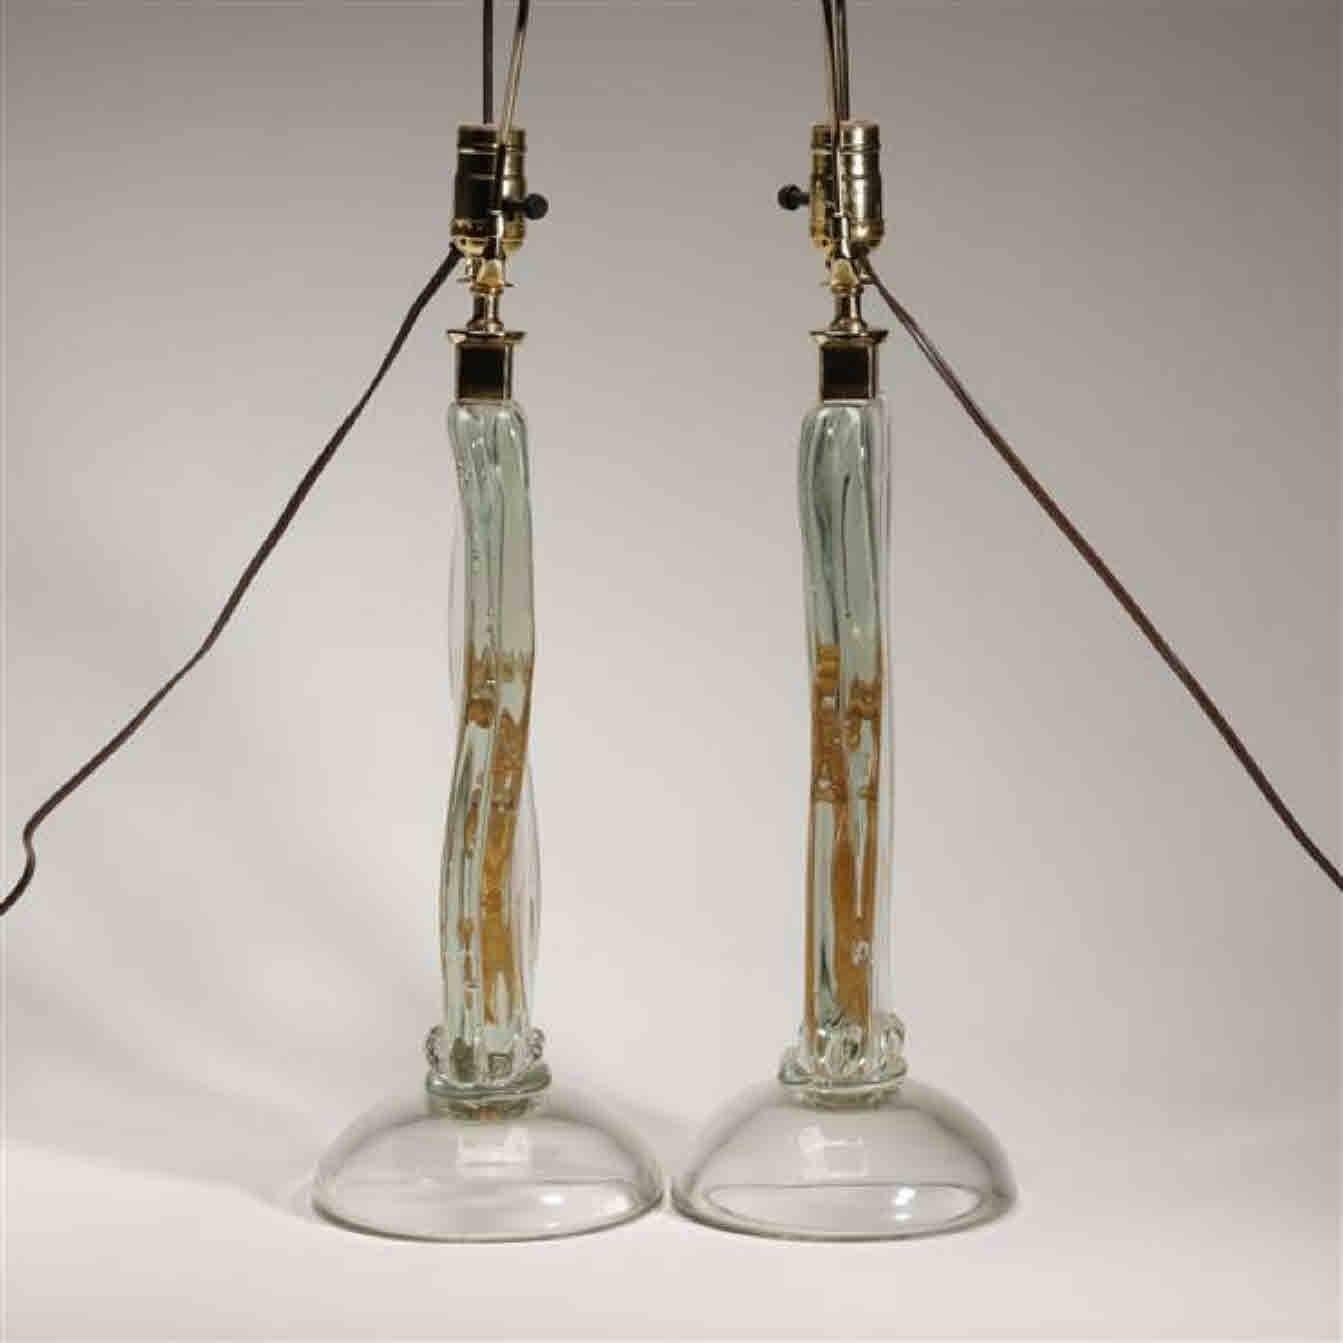 Pair of Rare Alfredo Barbini Murano Dancer Lamps for Cenedese, 1950s In Excellent Condition For Sale In Keego Harbor, MI